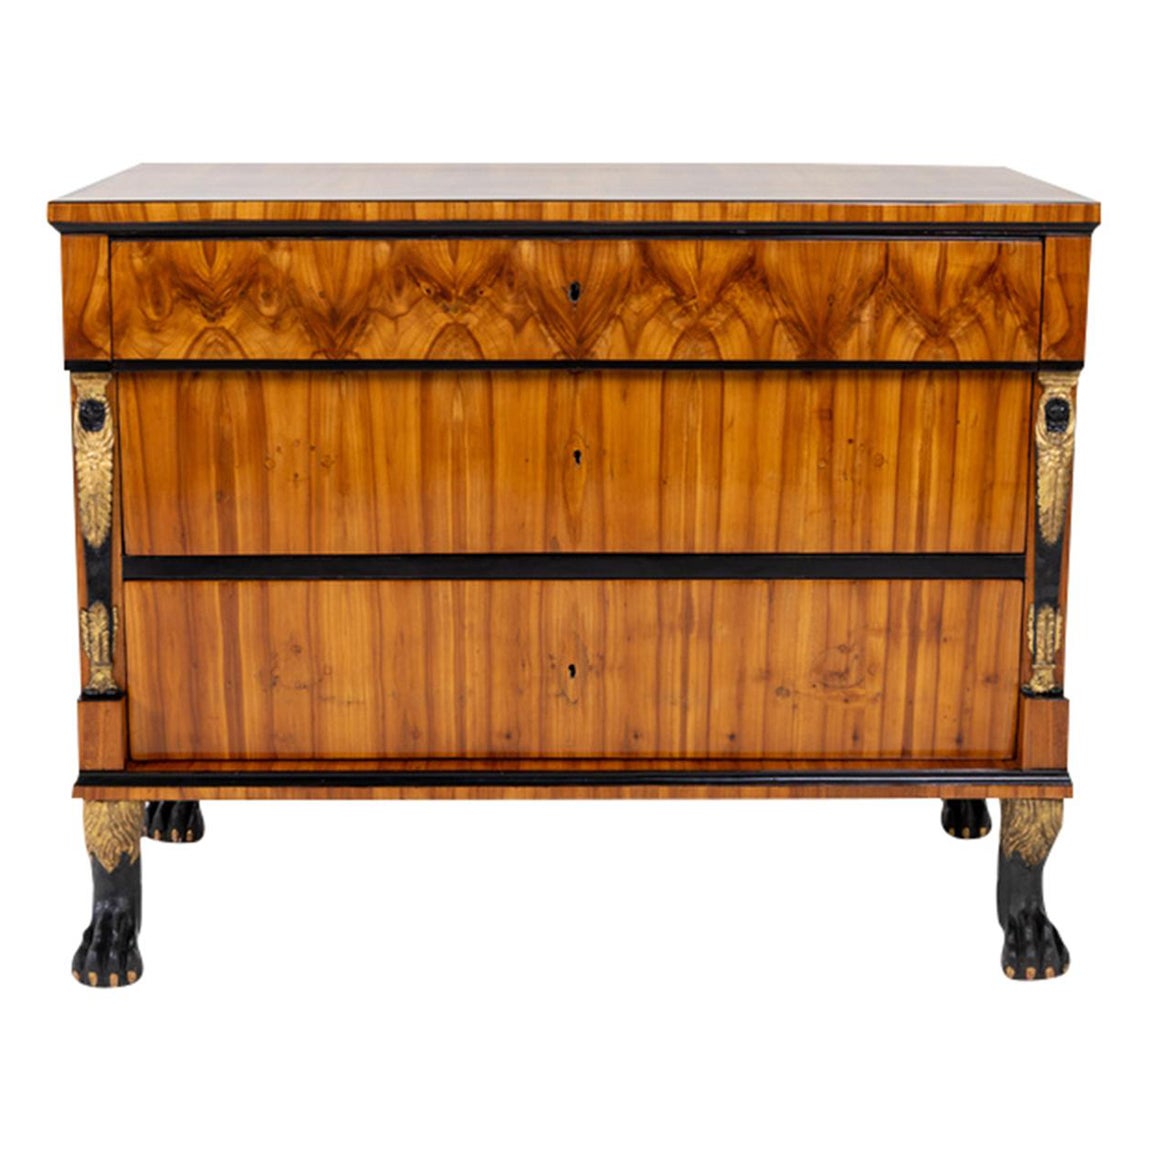 19th Century German Biedermeier Cherrywood Chest of Drawers - Antique Commode